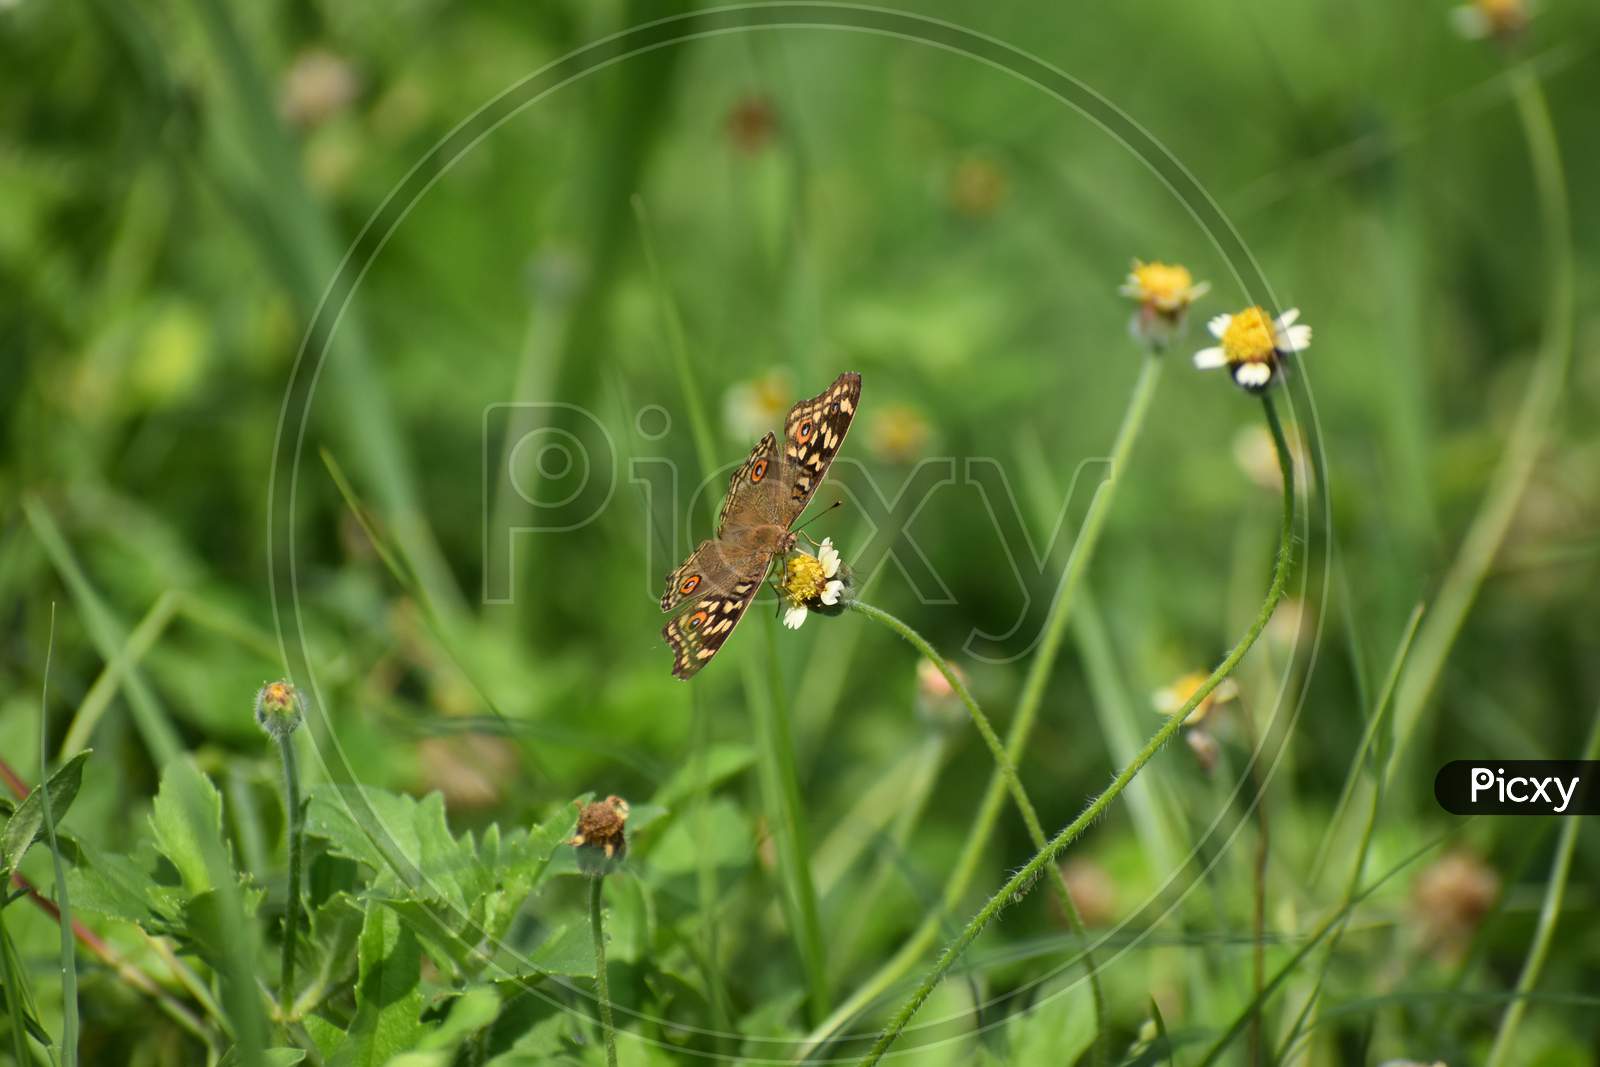 Butterfly on a green leaf with background blur